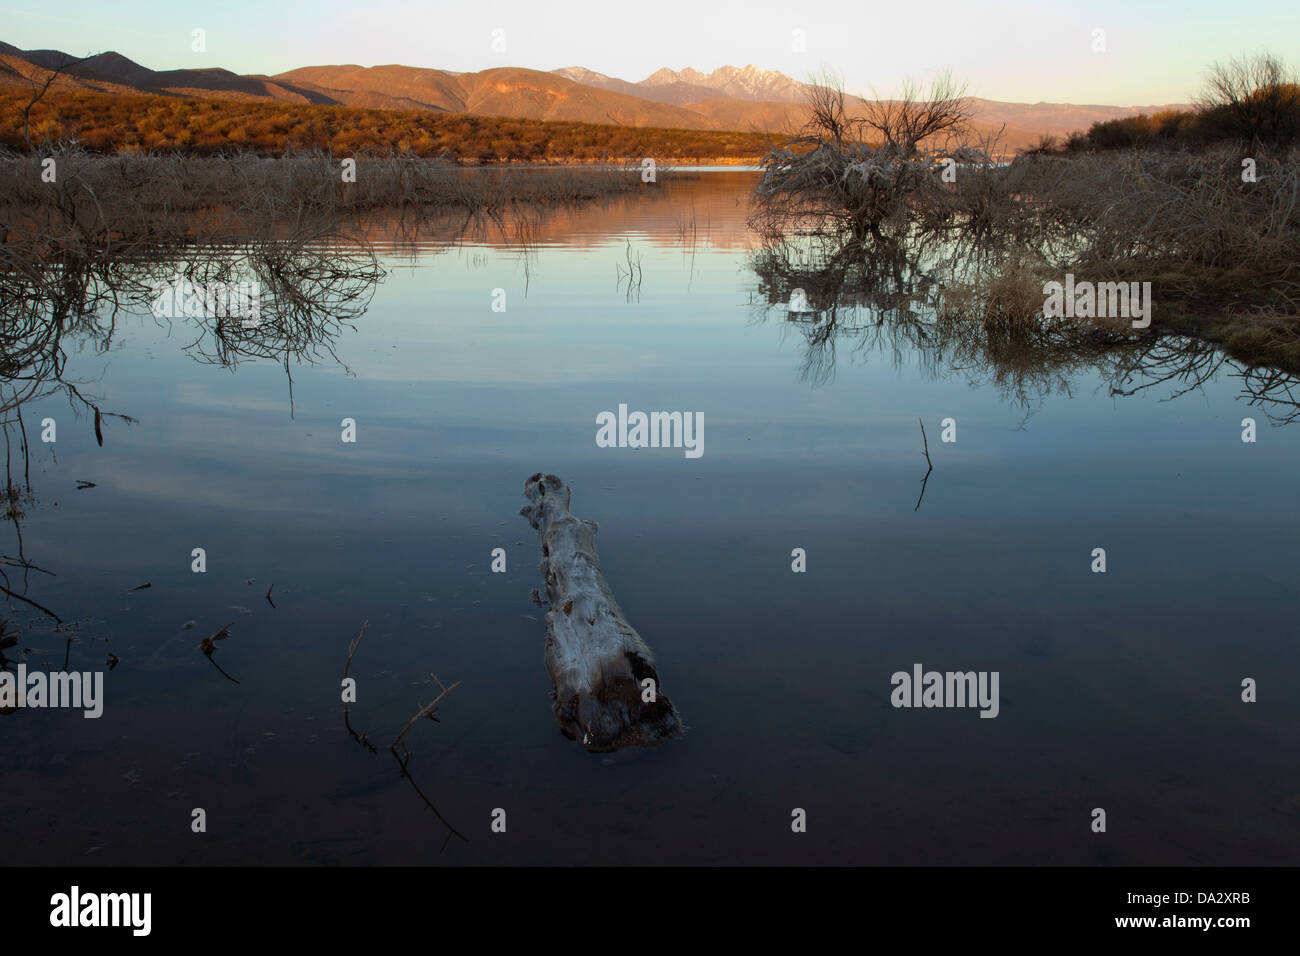 Dead brush in low water in Roosevelt Lake in central Arizona. Stock Photo